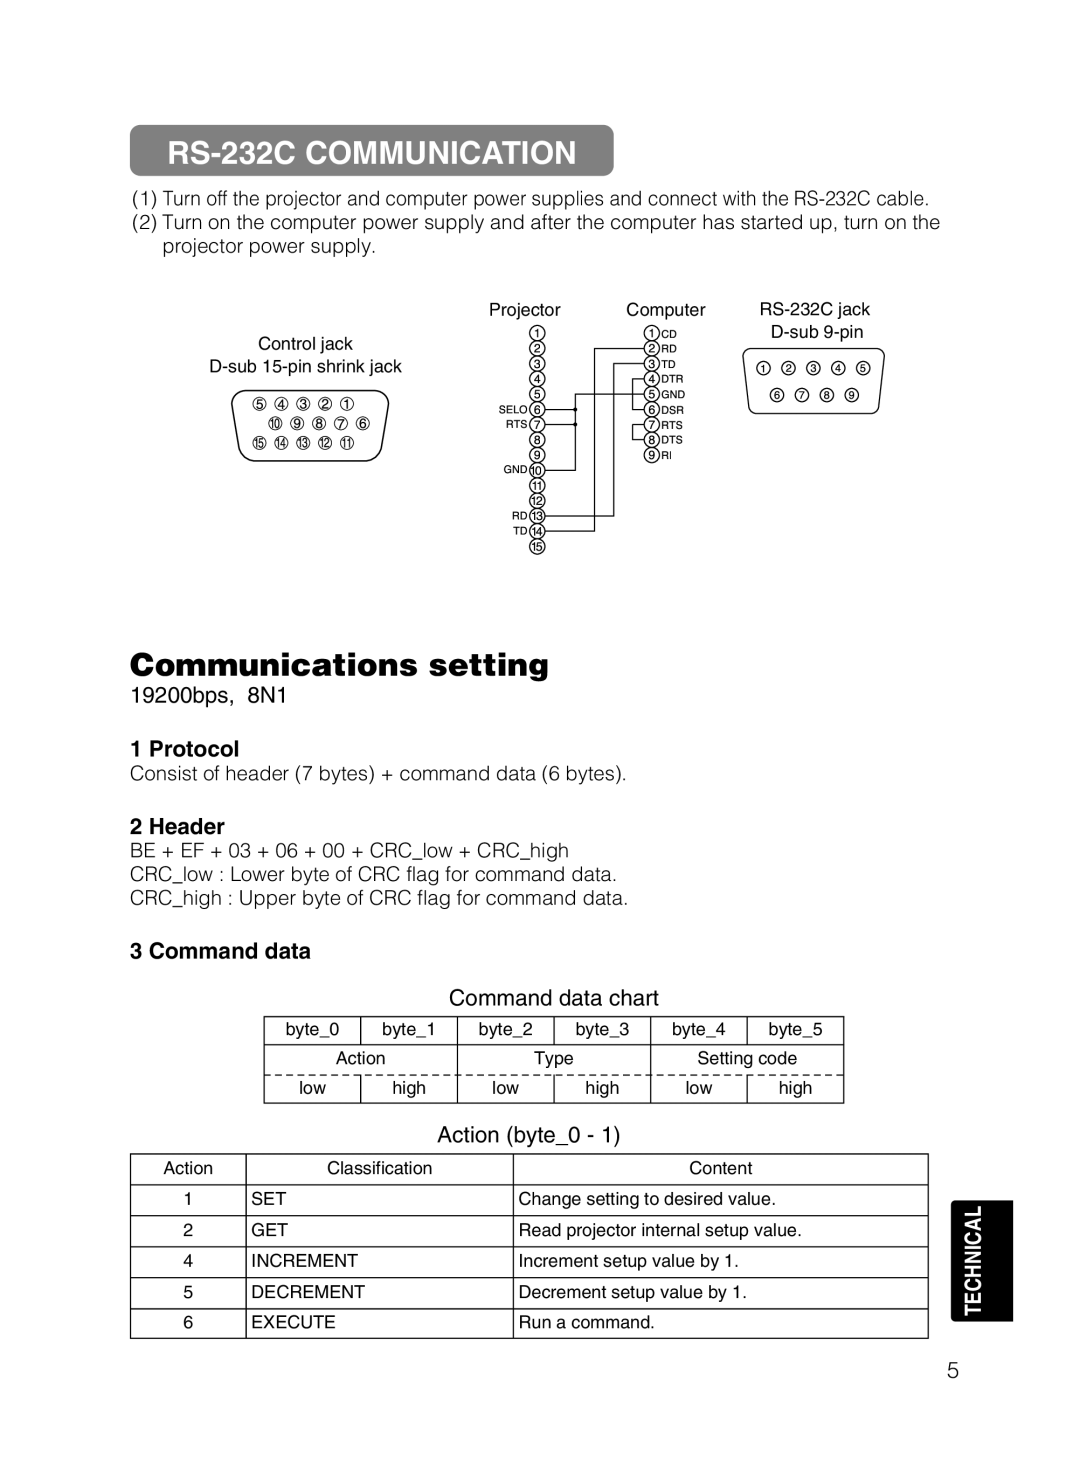 Dukane 28A8049B RS-232C COMMUNICATION, Communications setting, 19200bps, 8N1, Protocol, Header, Command data, Action byte0 